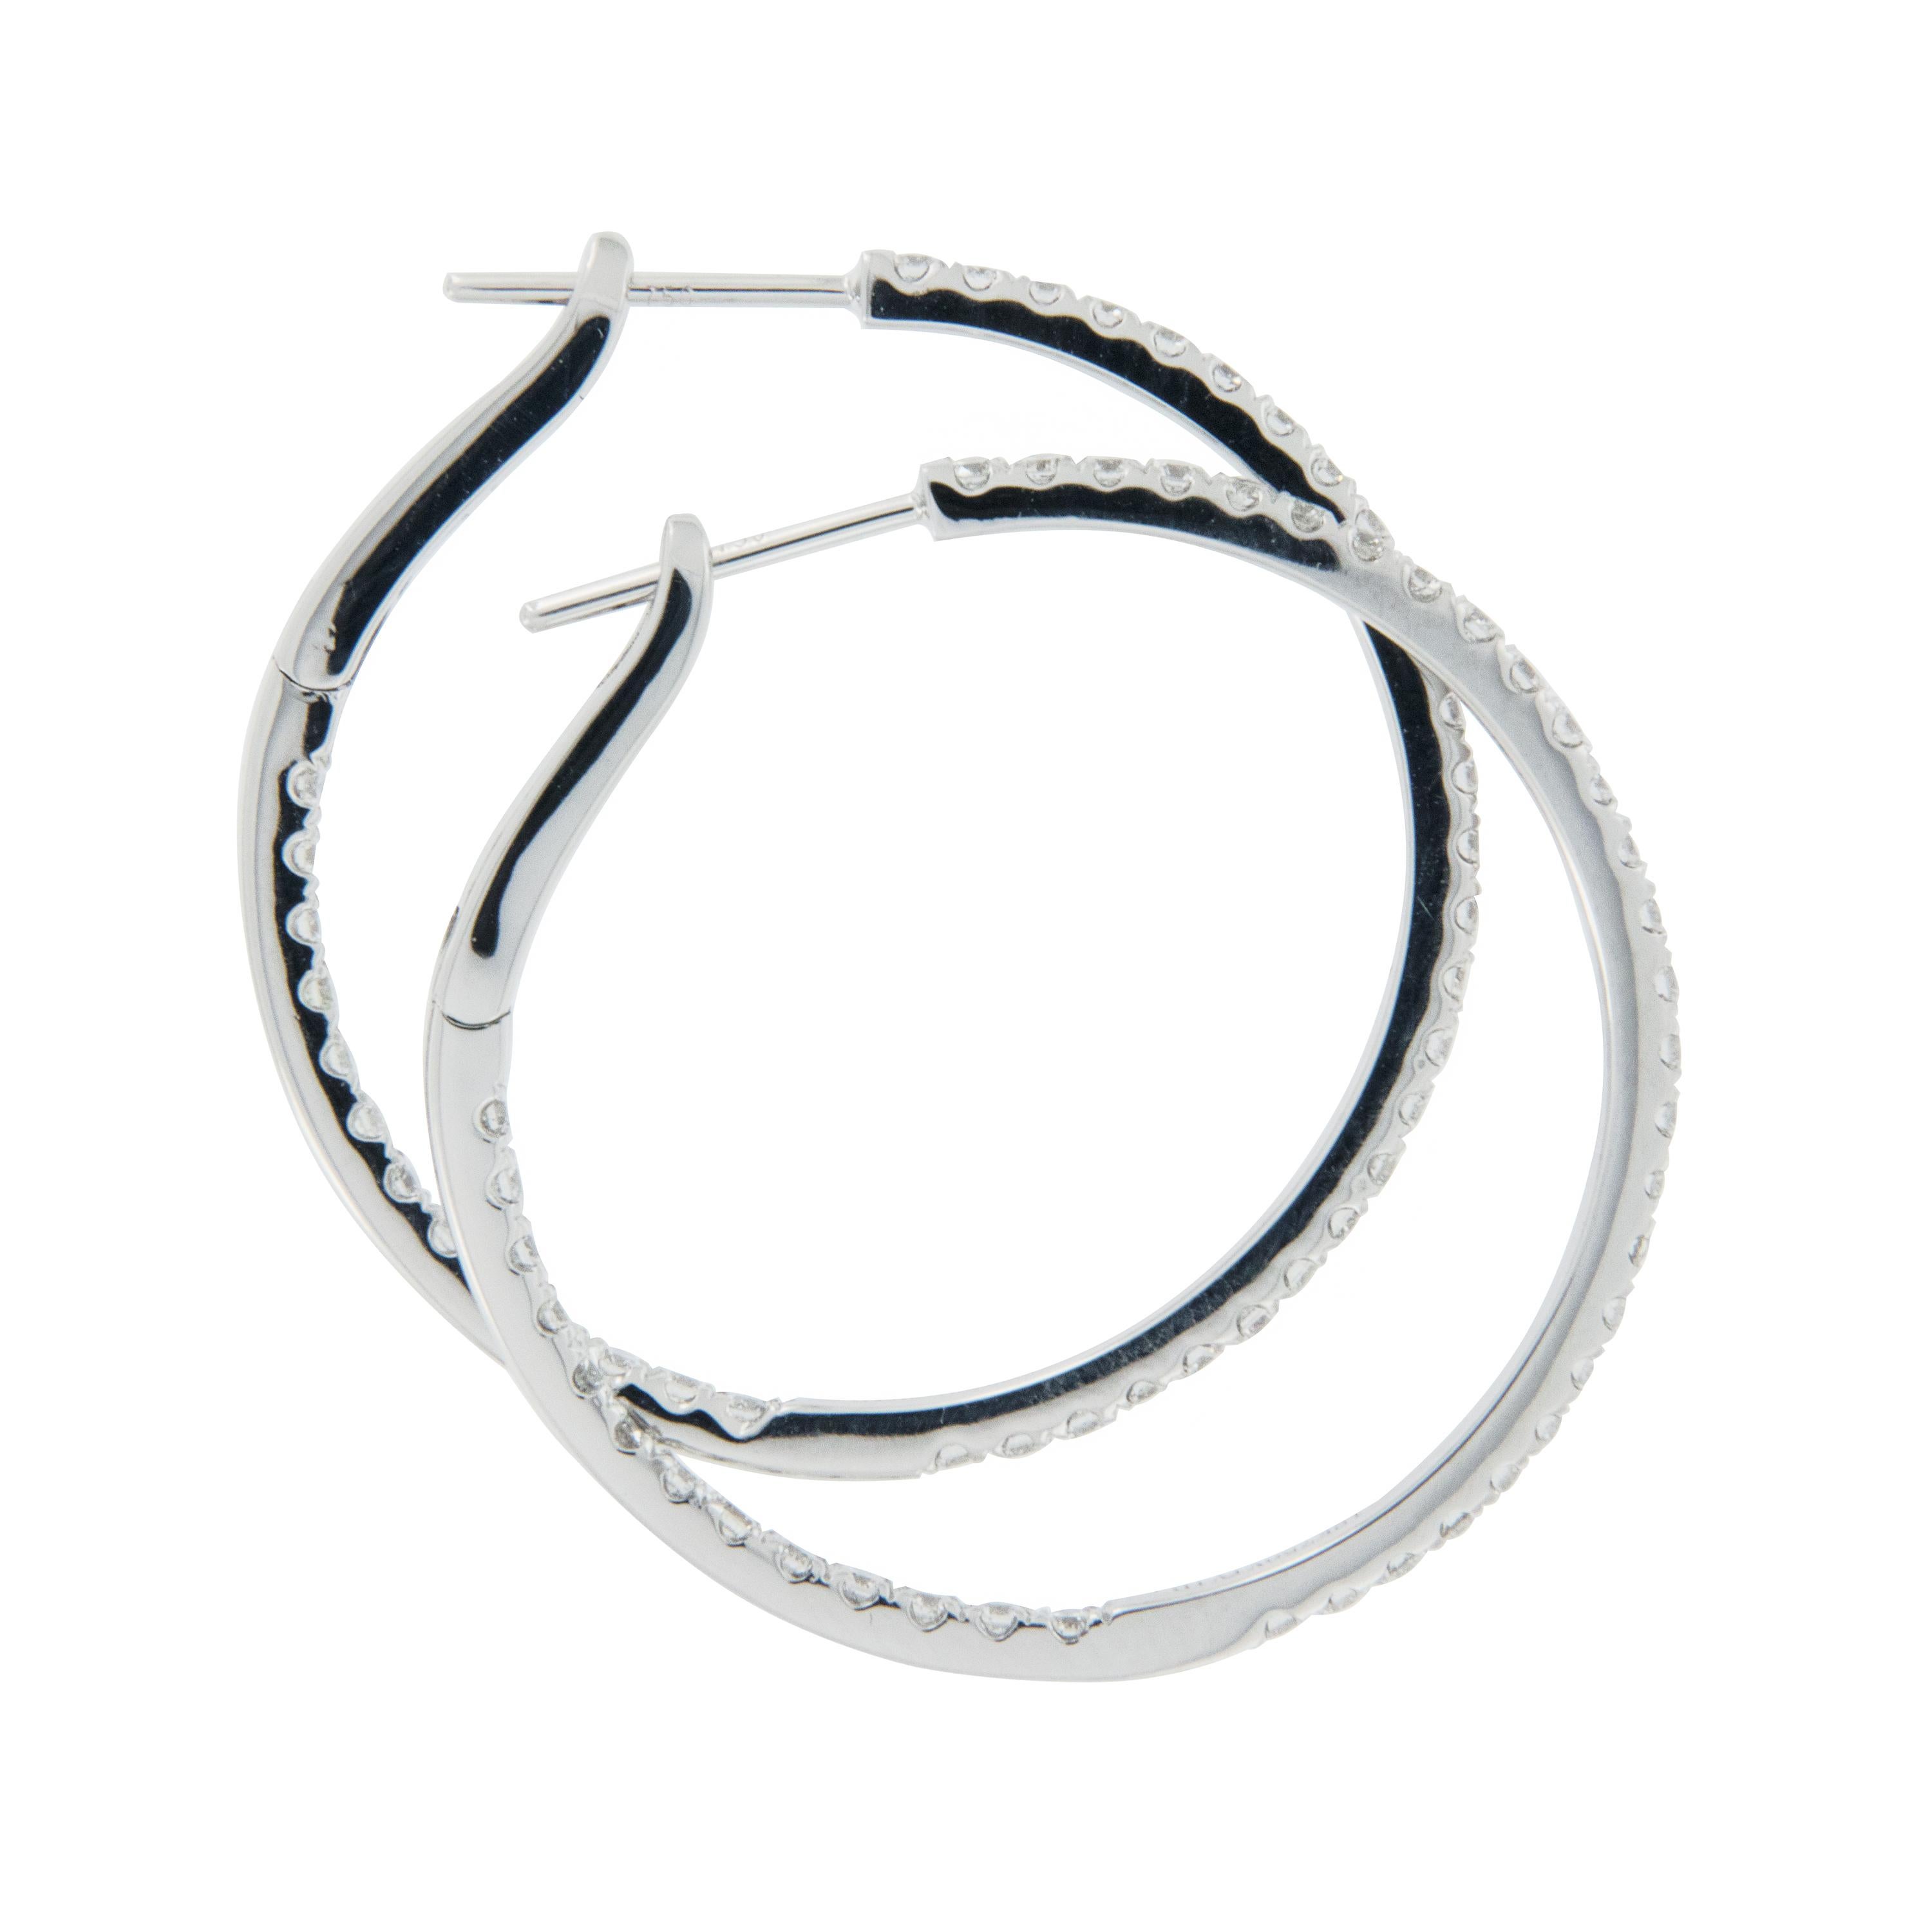 The solid construction of these hoops is what sets them apart from all others. With no hinge on the bottom there is no worry of misalignment or wearing out. Plus being made of fine 18 karat white gold with 1.02 Cttw of high quality diamonds